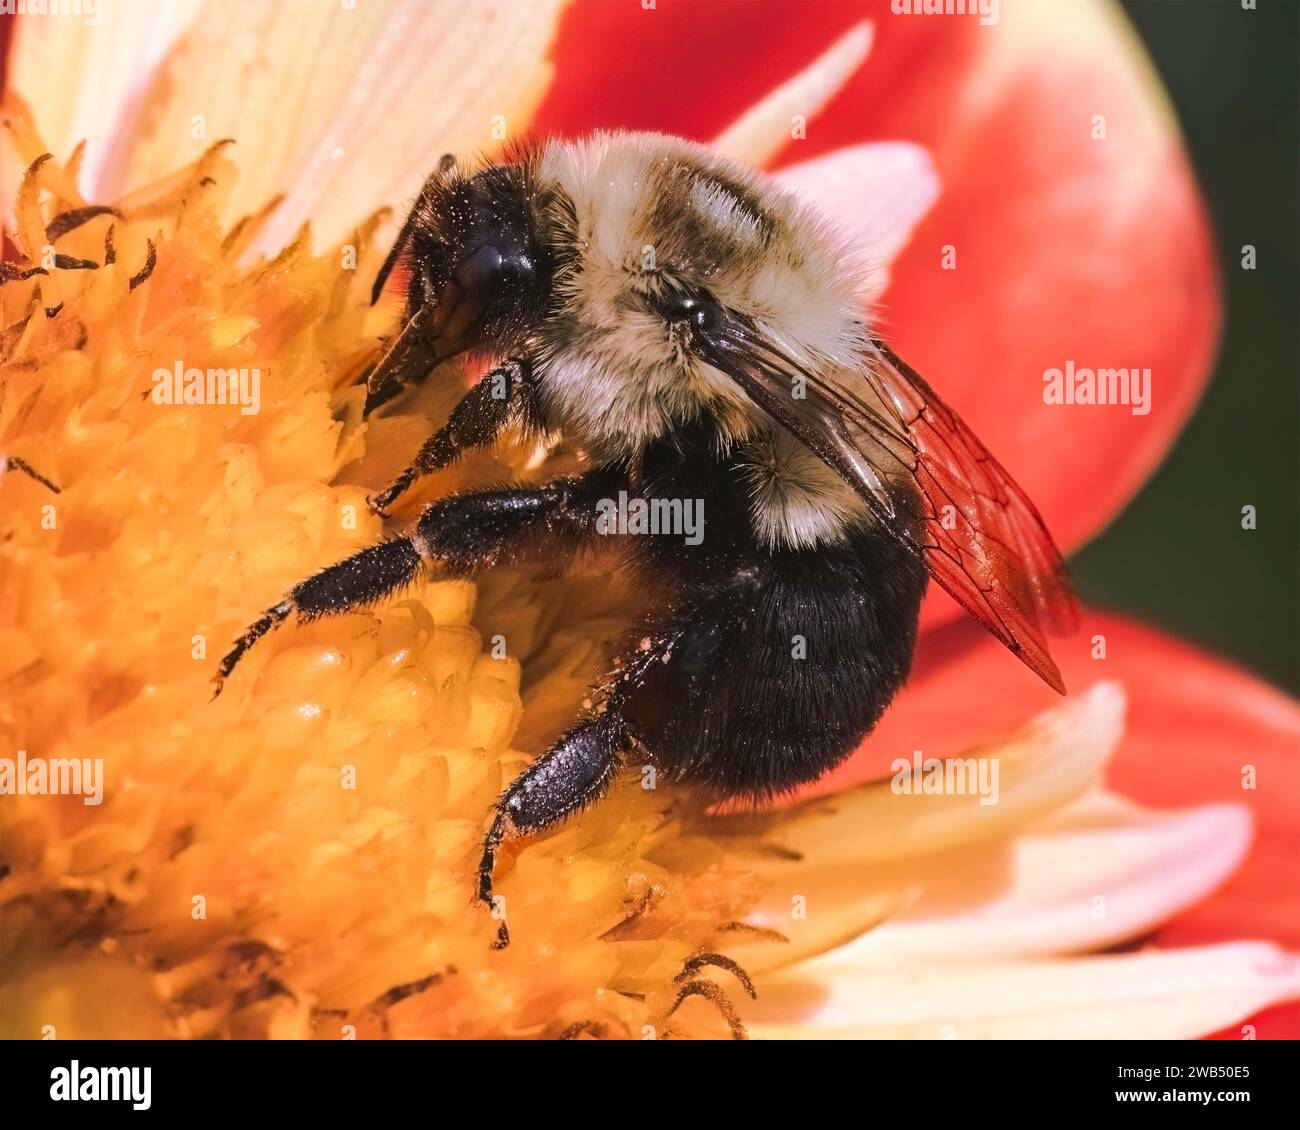 Close up of a Bombus impatiens Common Eastern Bumble Bee feeding on a red and yellow dahlia flower. Long Island, New York, USA Stock Photo